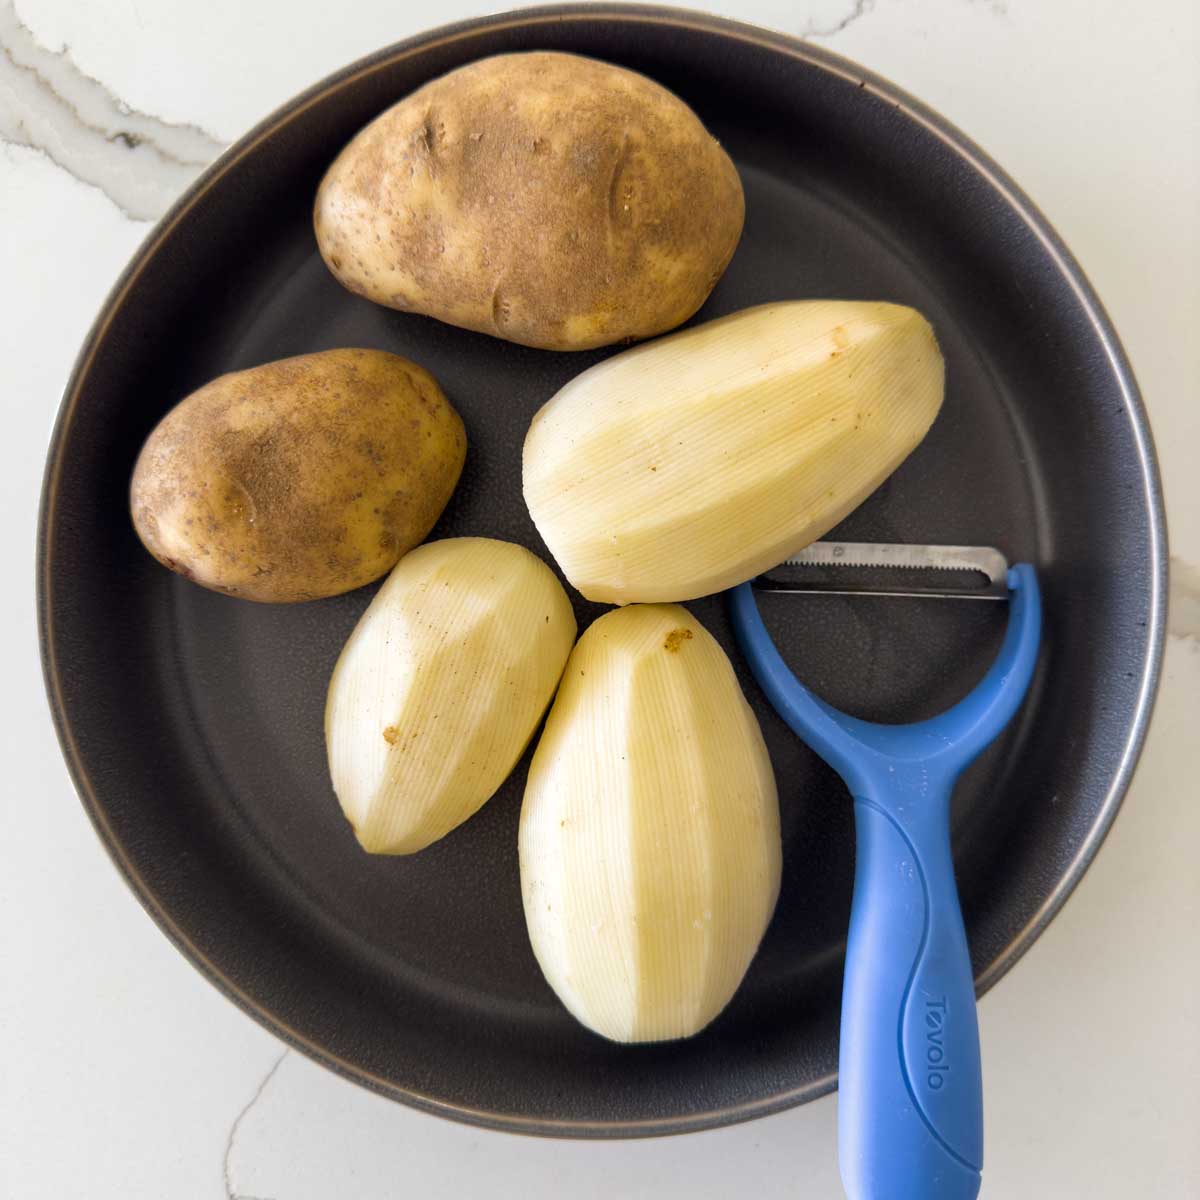 Some peeled and unpeeled potatoes with a peeler in a large dish.